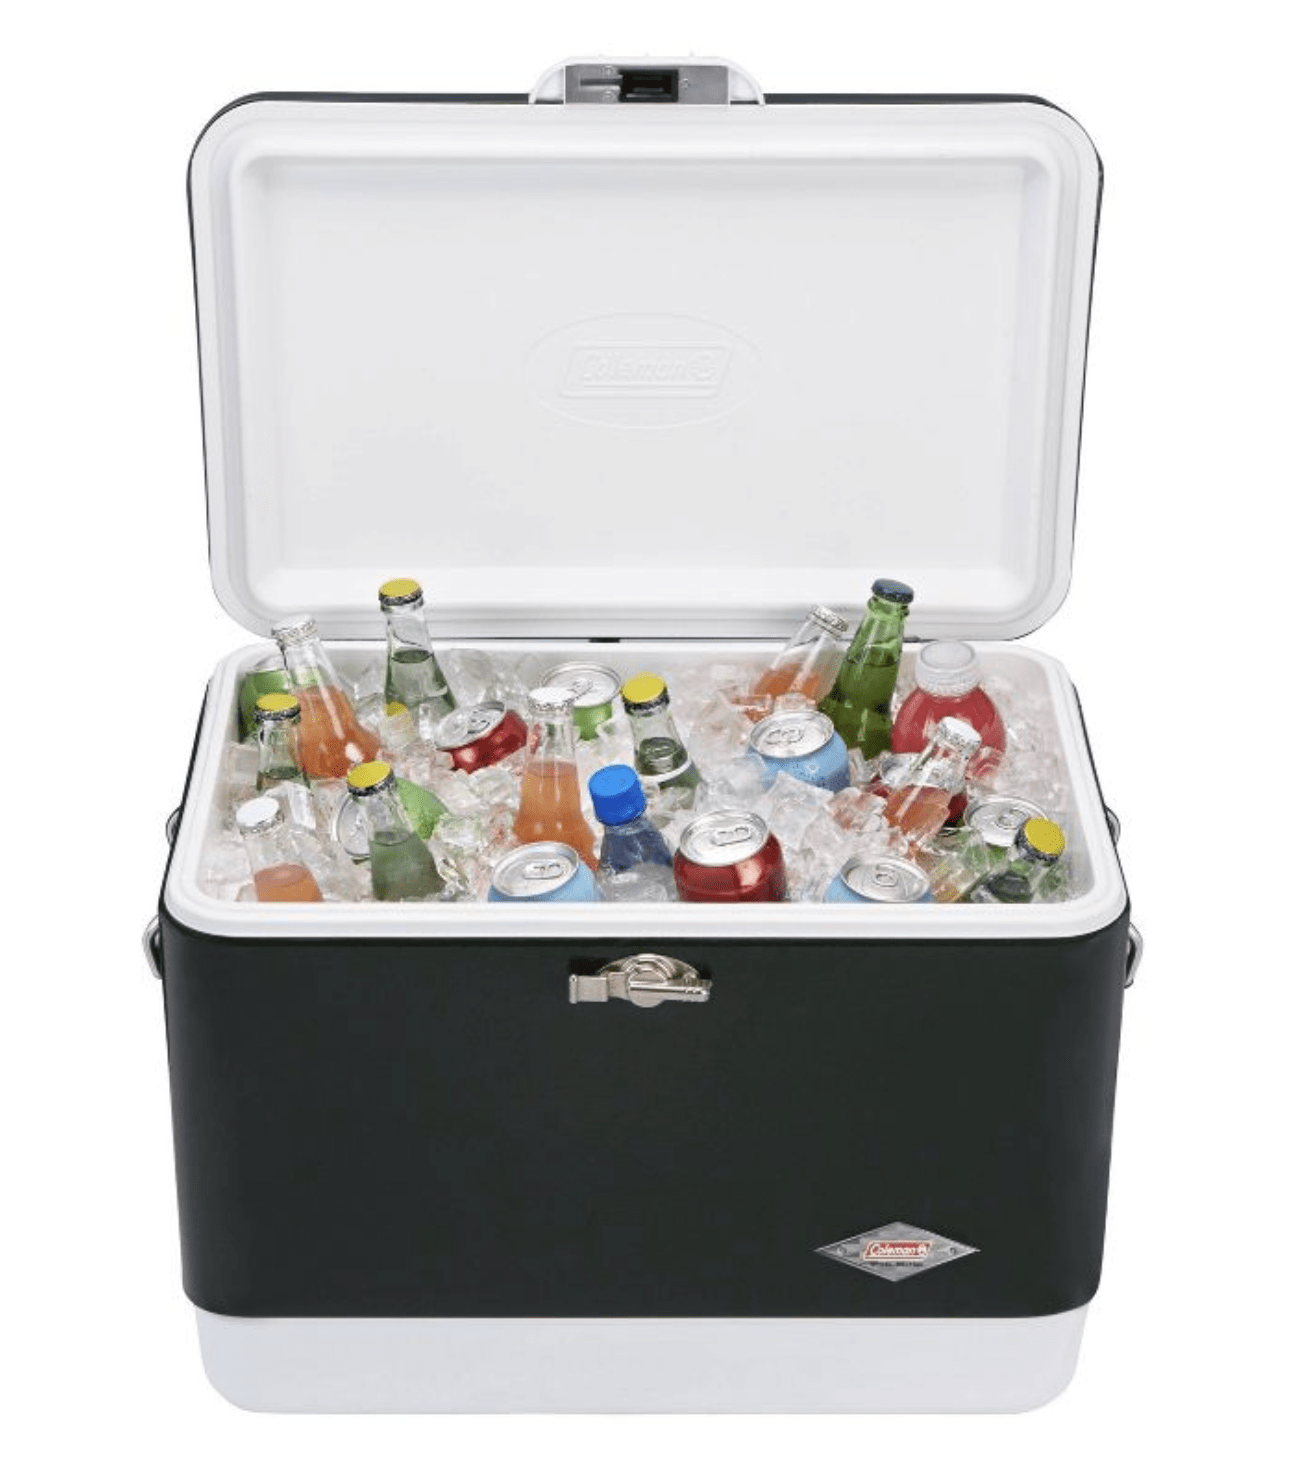 This Coleman Cooler Is Up to 25% Off